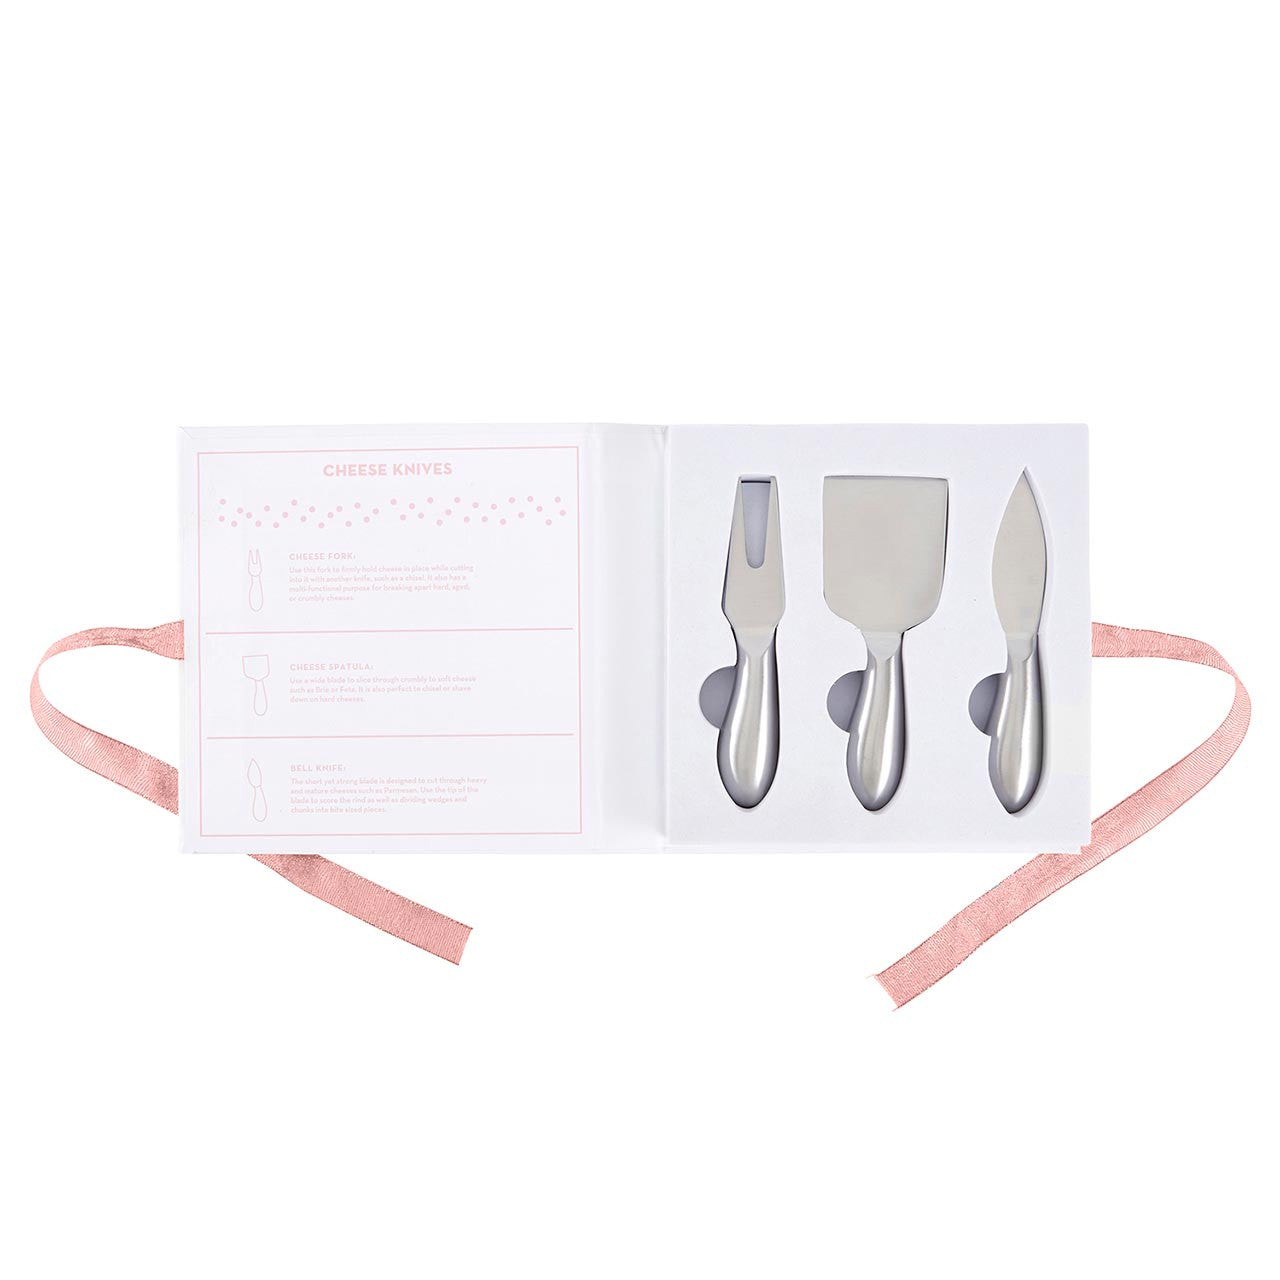 Cheese Knife Book | 3 Piece Gourmet Cheese Knives Set In Gift Box